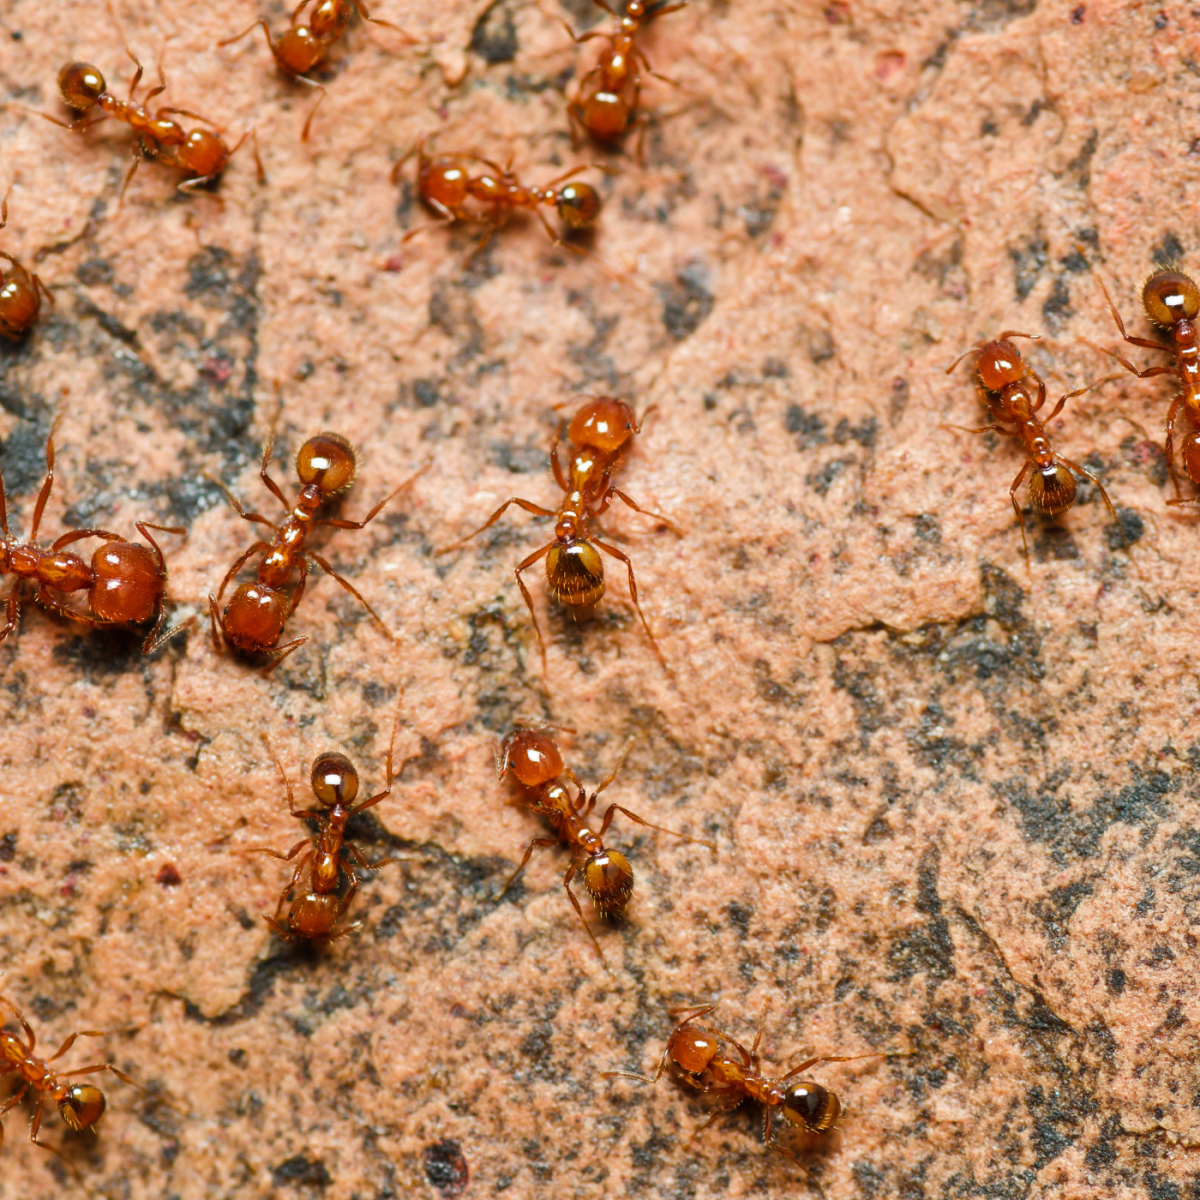 Below are ways to treat fire ant bites